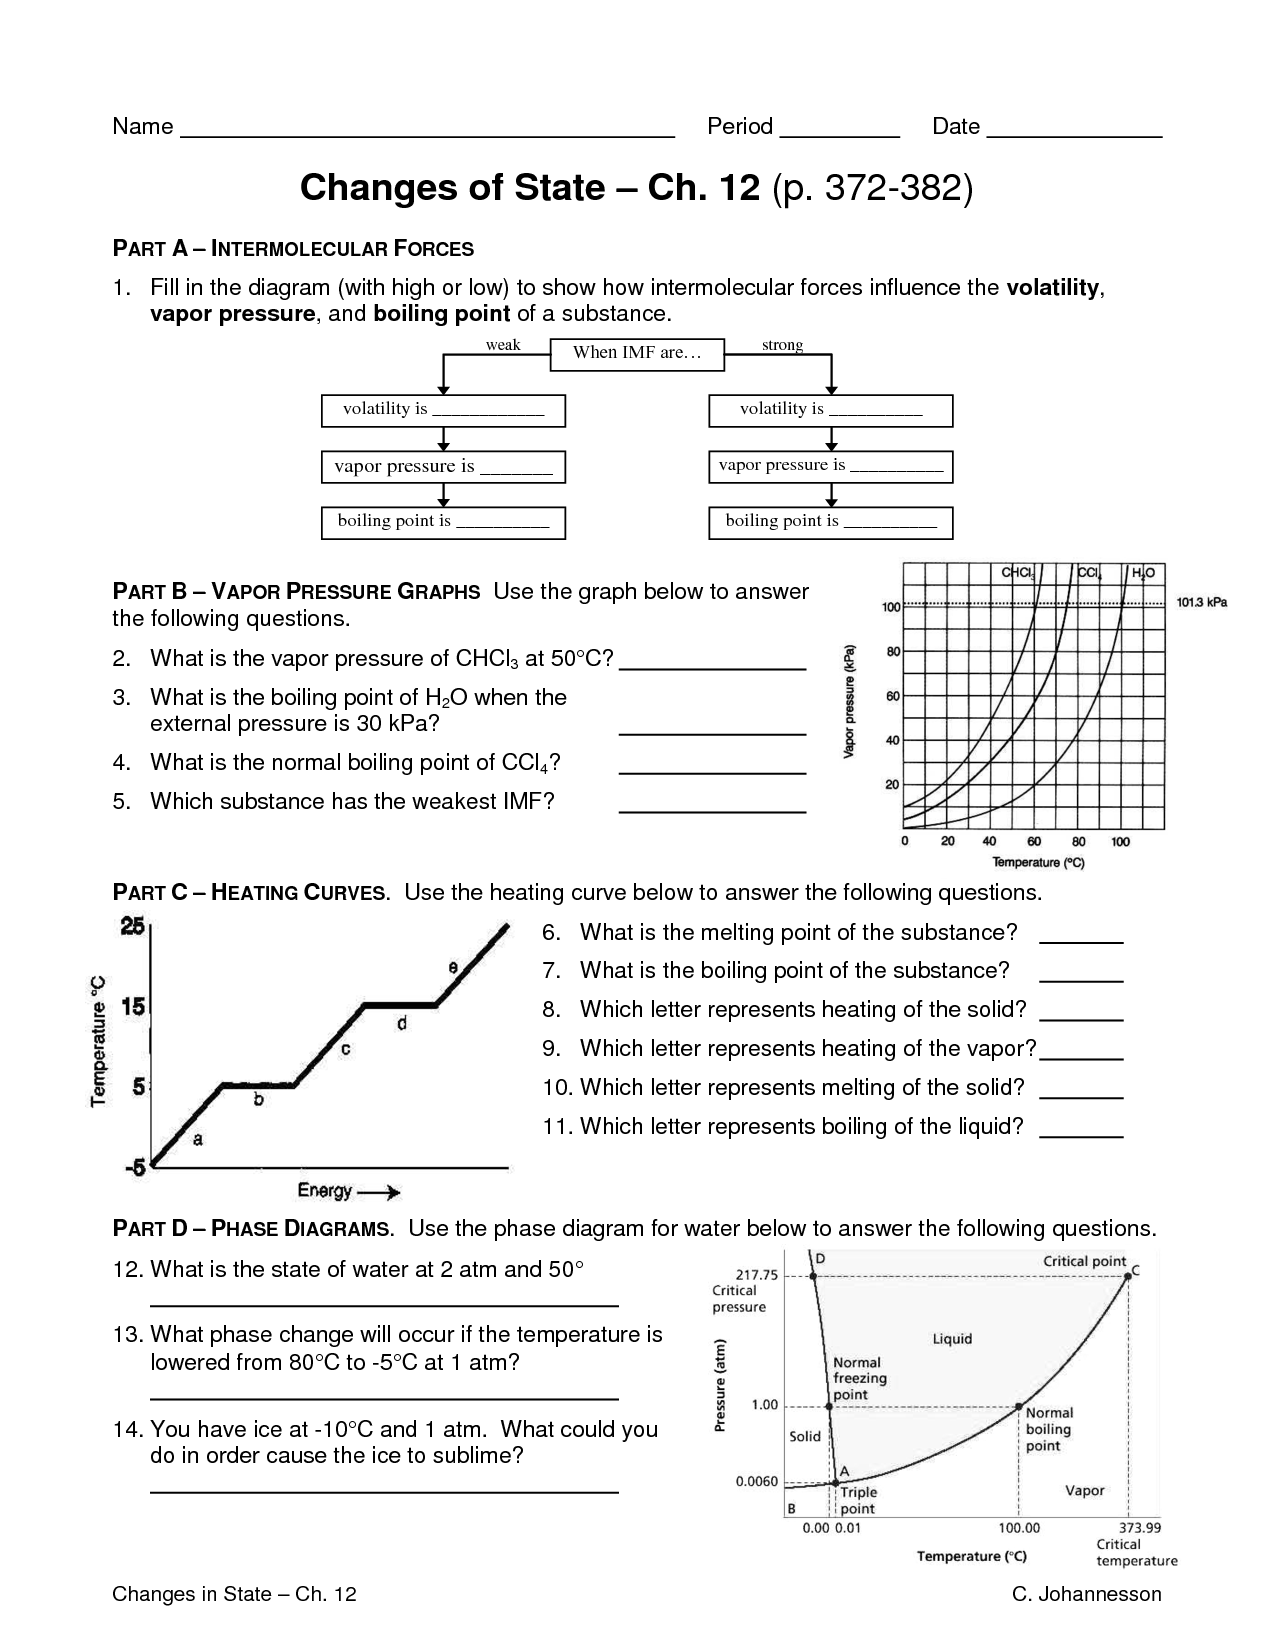 Changes of State Worksheet Answers Image